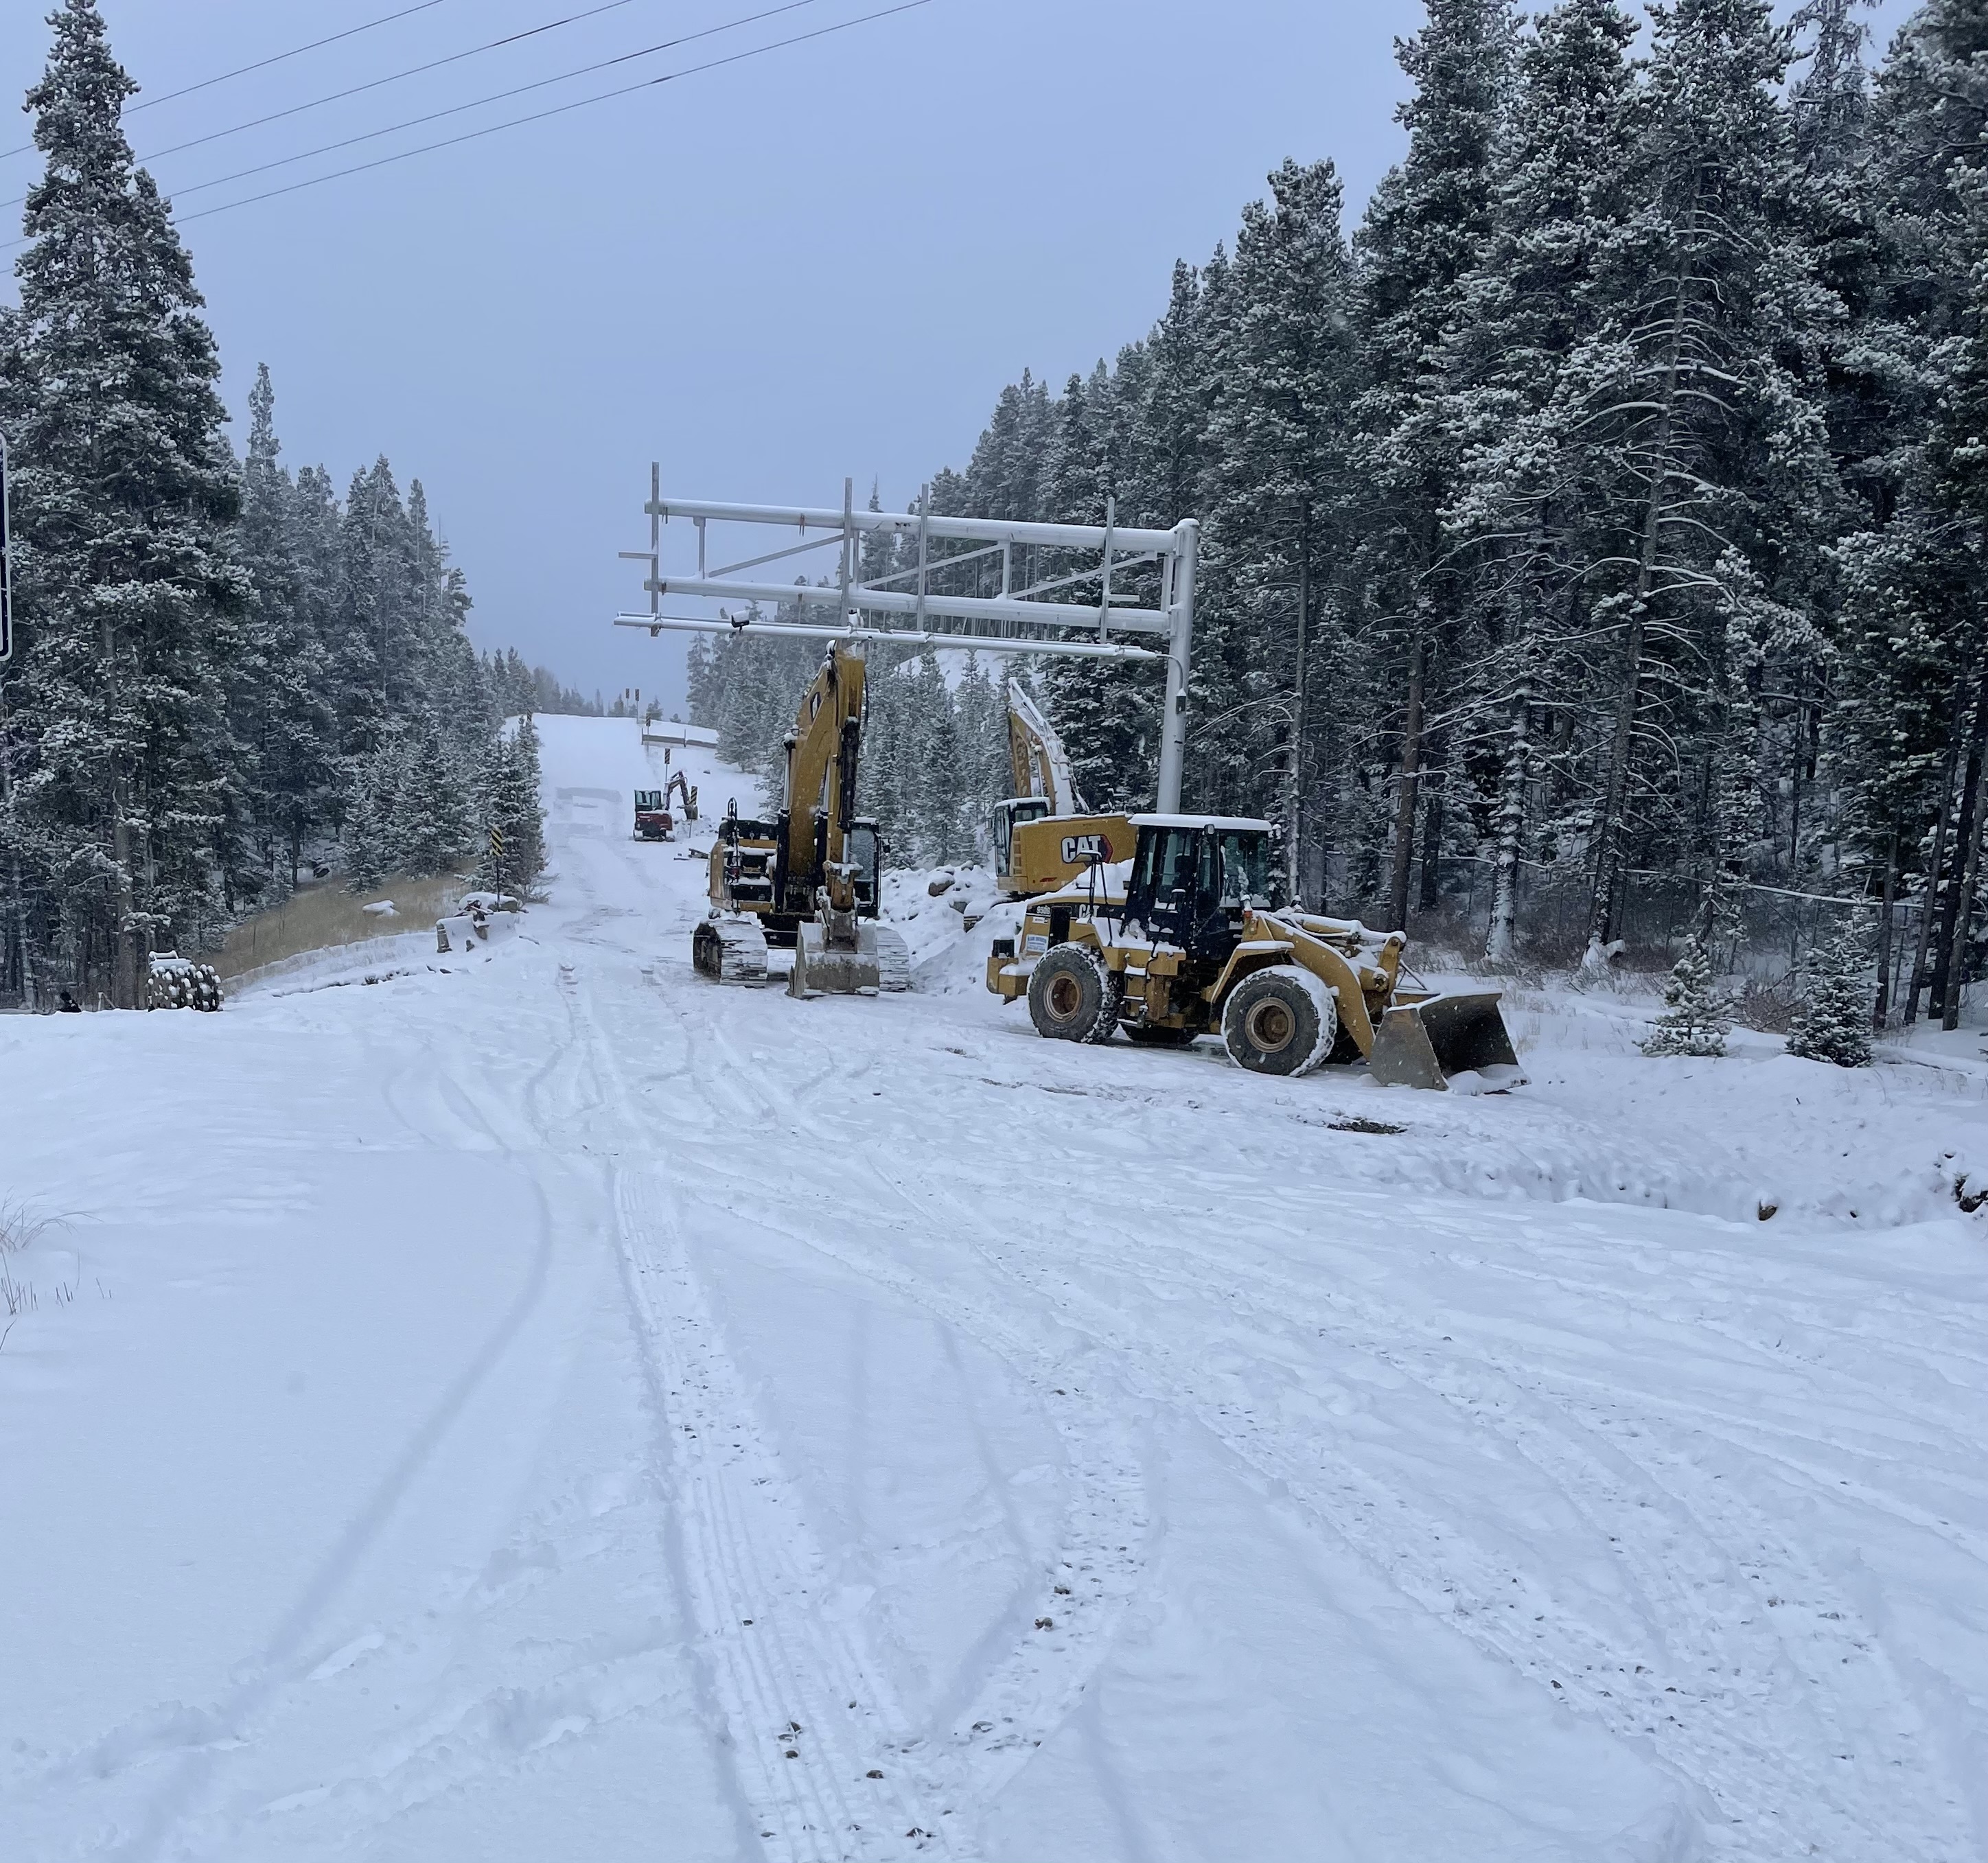 November 3 snow storm delayed  the runaway truck ramp operations on the eastside of Monarch Pass. Heavy equipment used for repairing the truck ramp made tracks through the fresh snow.jpg detail image